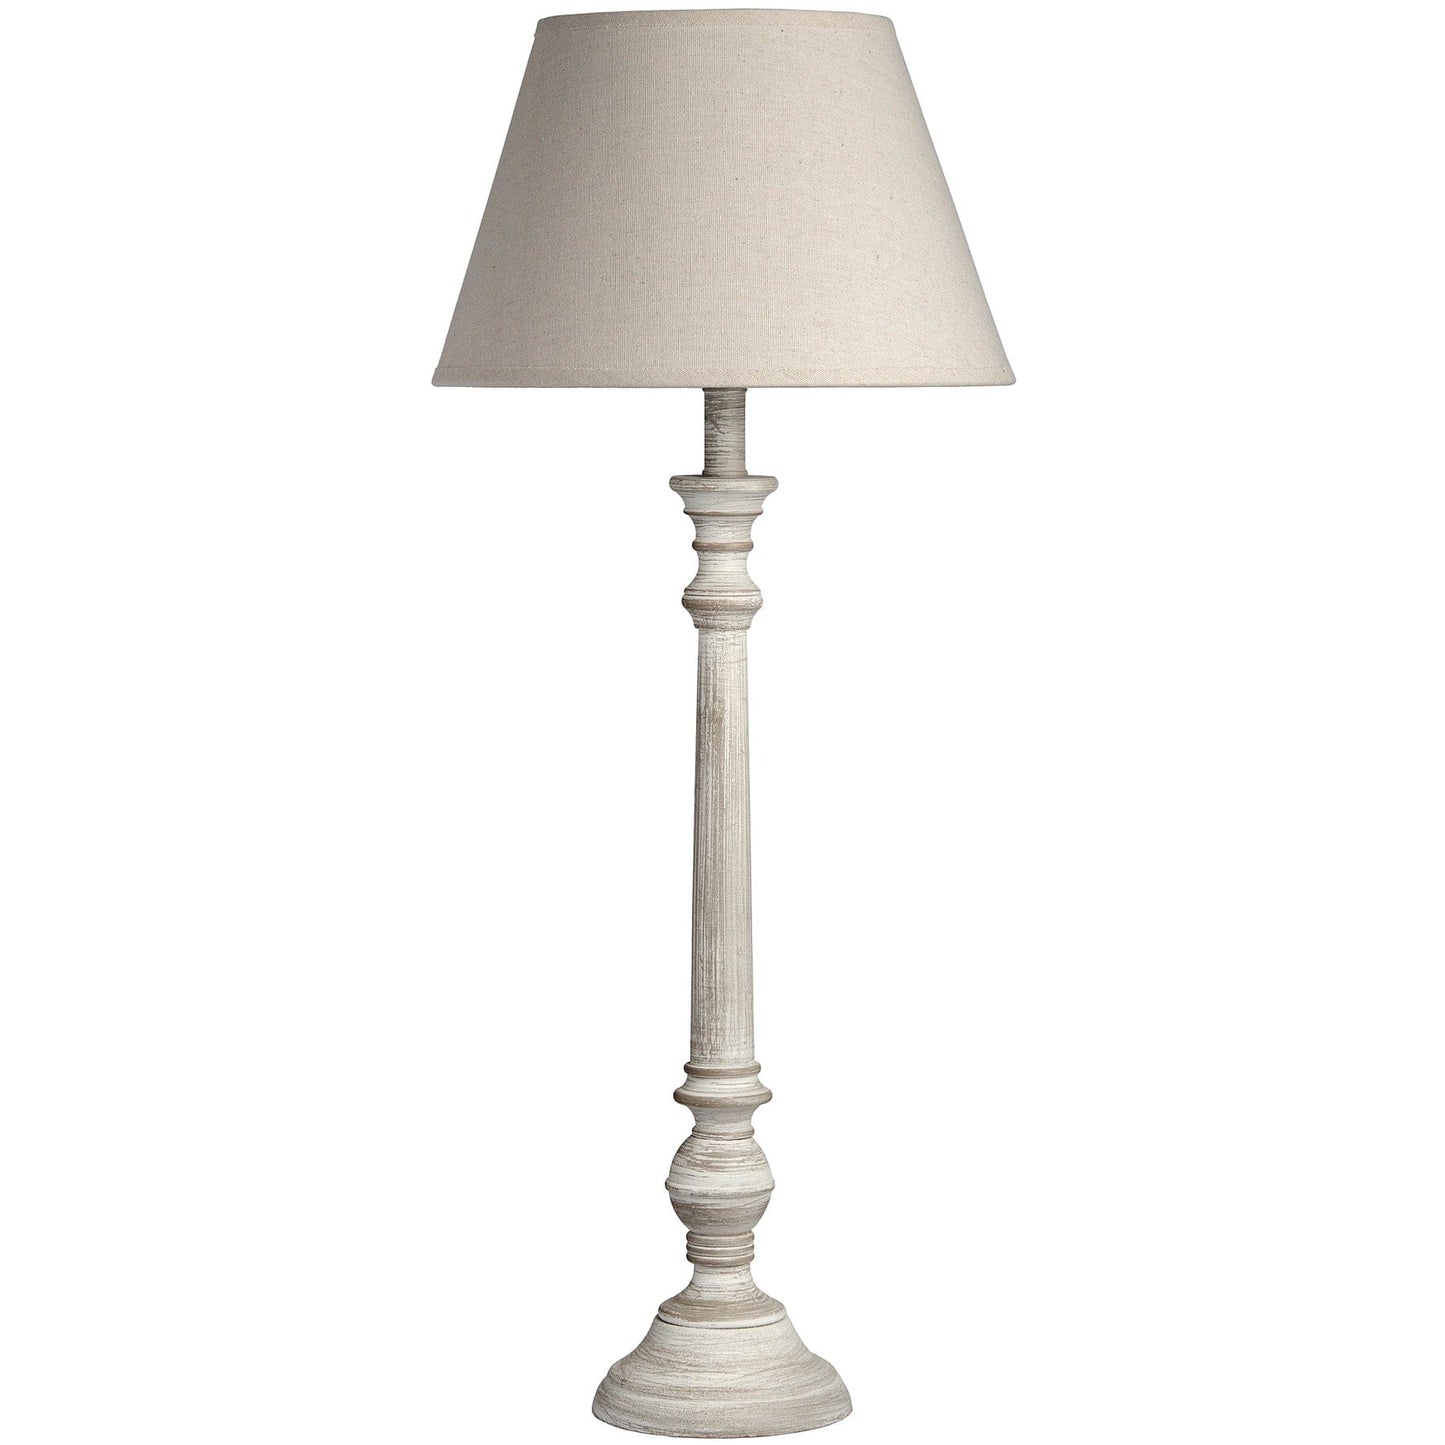 Hill Interiors Table Lamp Leptis Magna Table Lamp